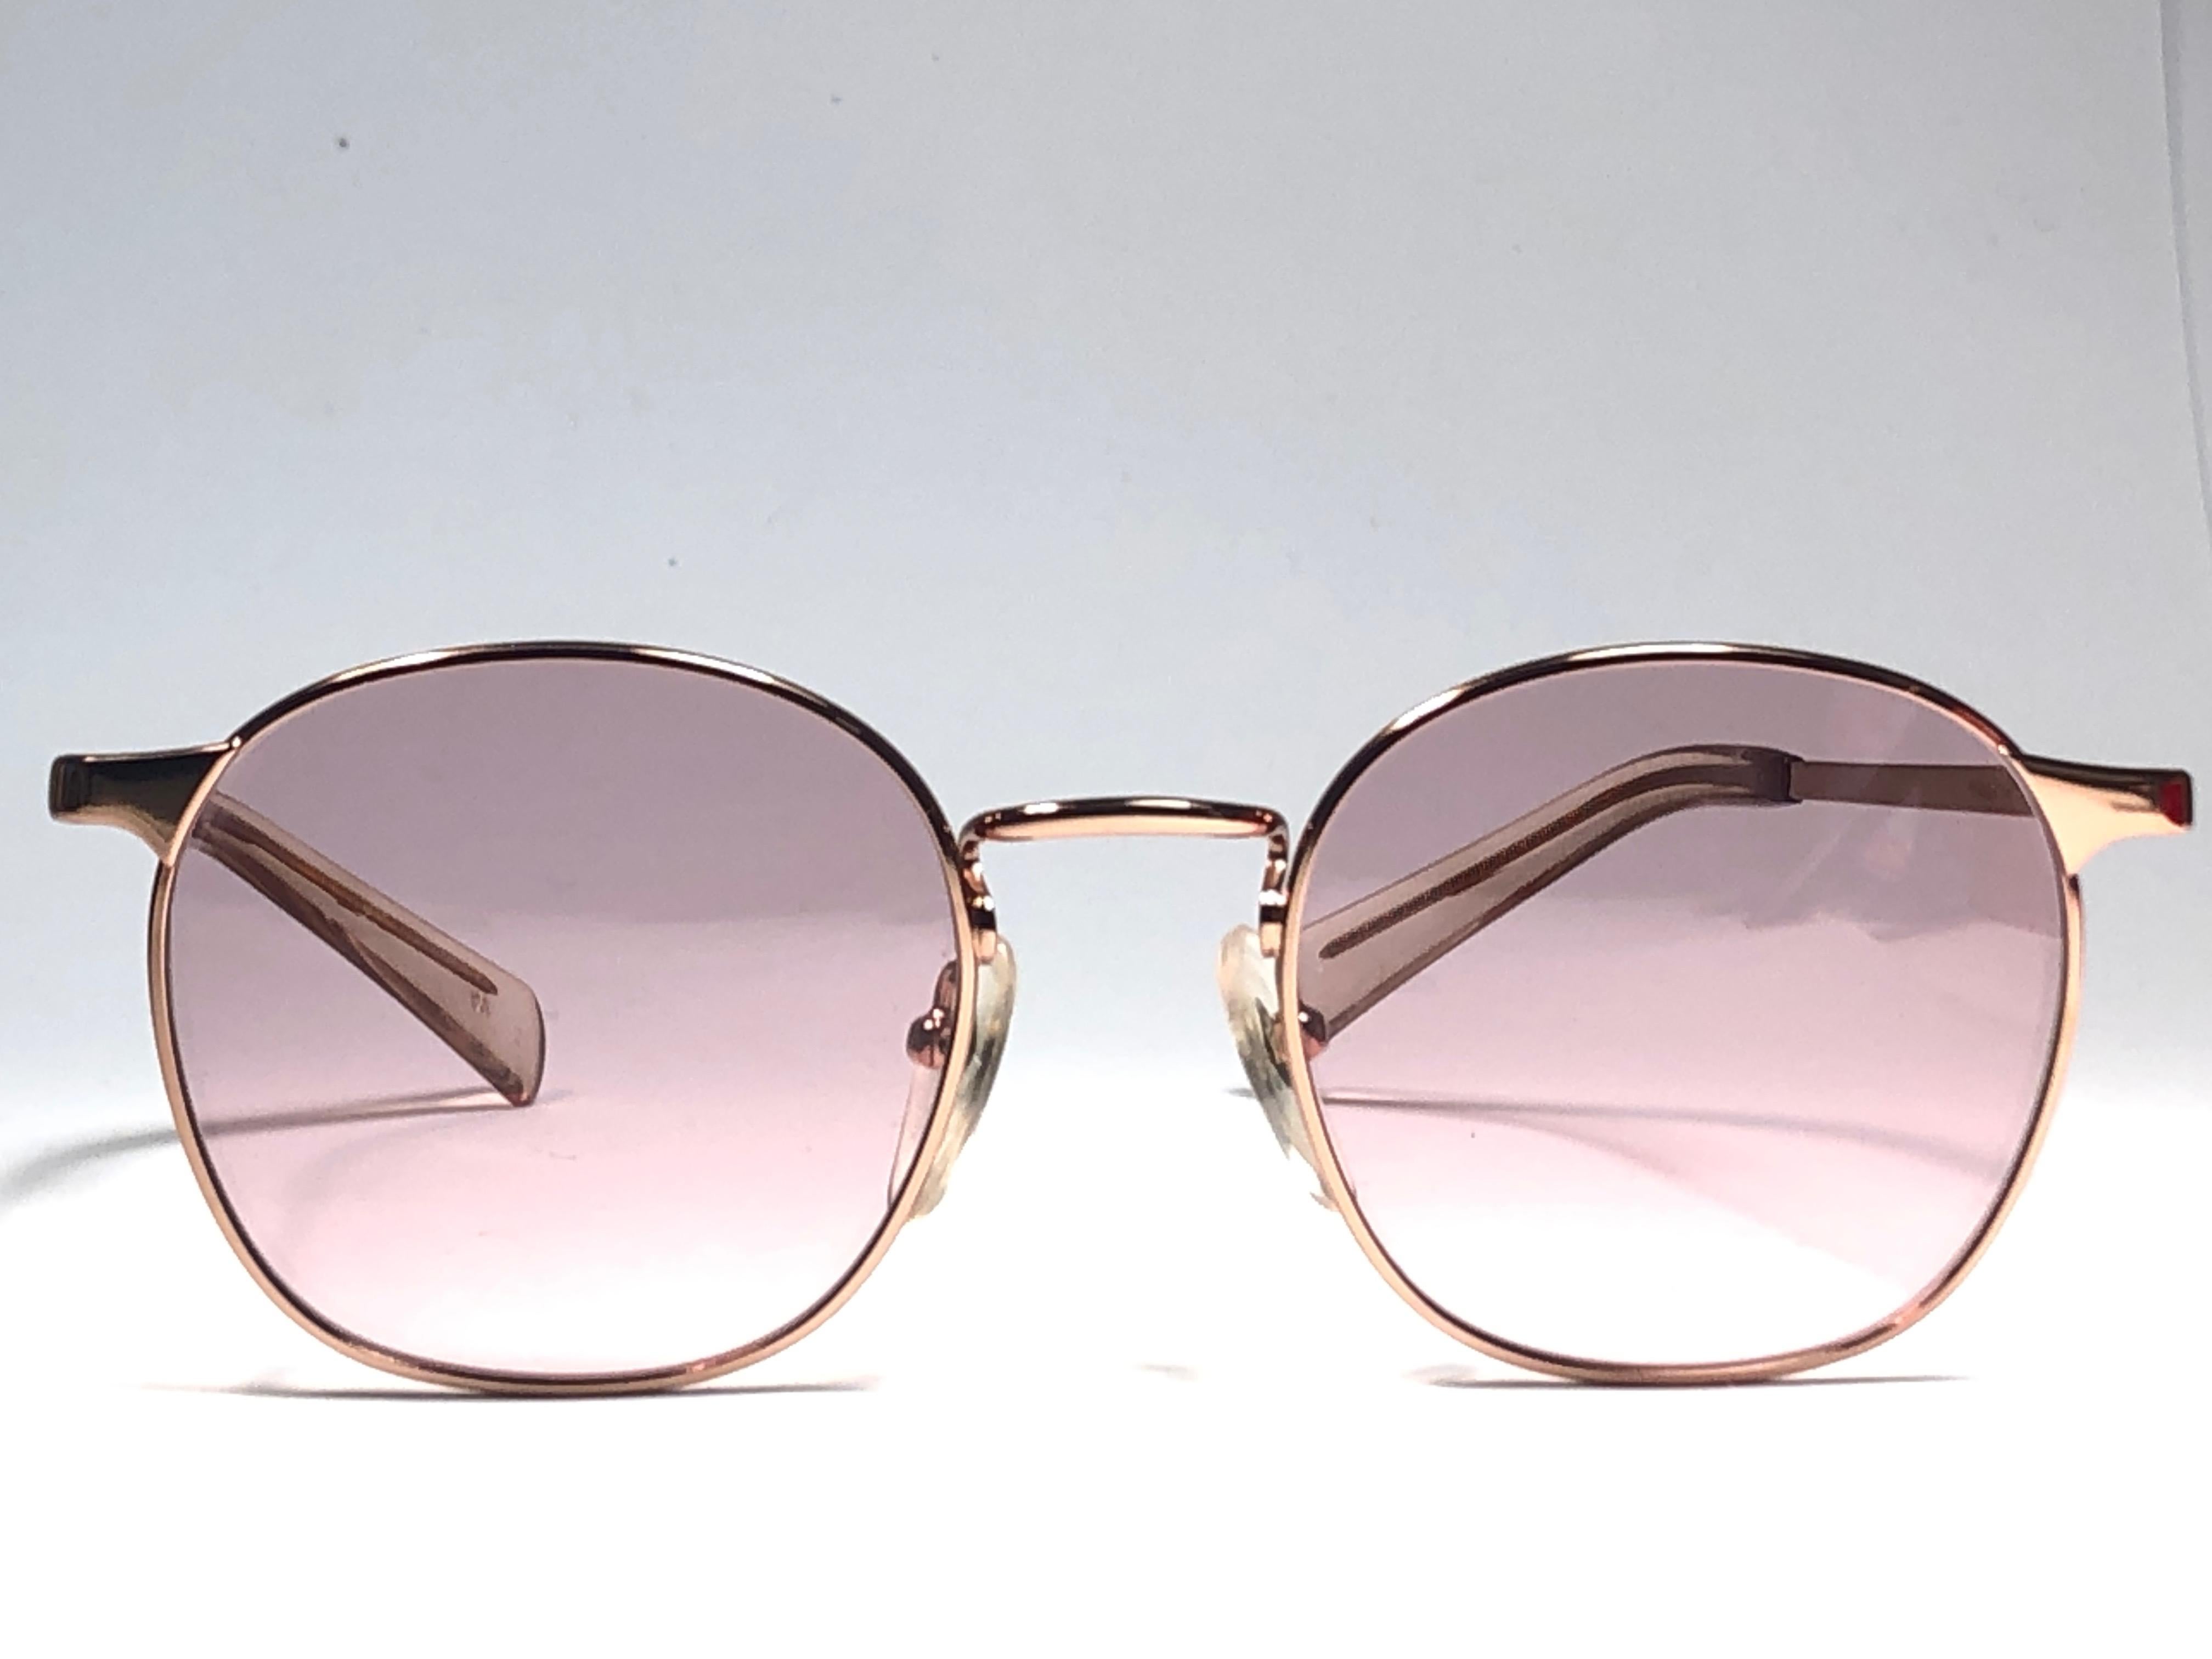 New Jean Paul Gaultier Junior 57 0172 Rose Gold Sunglasses 1990 Made in Japan  In New Condition For Sale In Baleares, Baleares